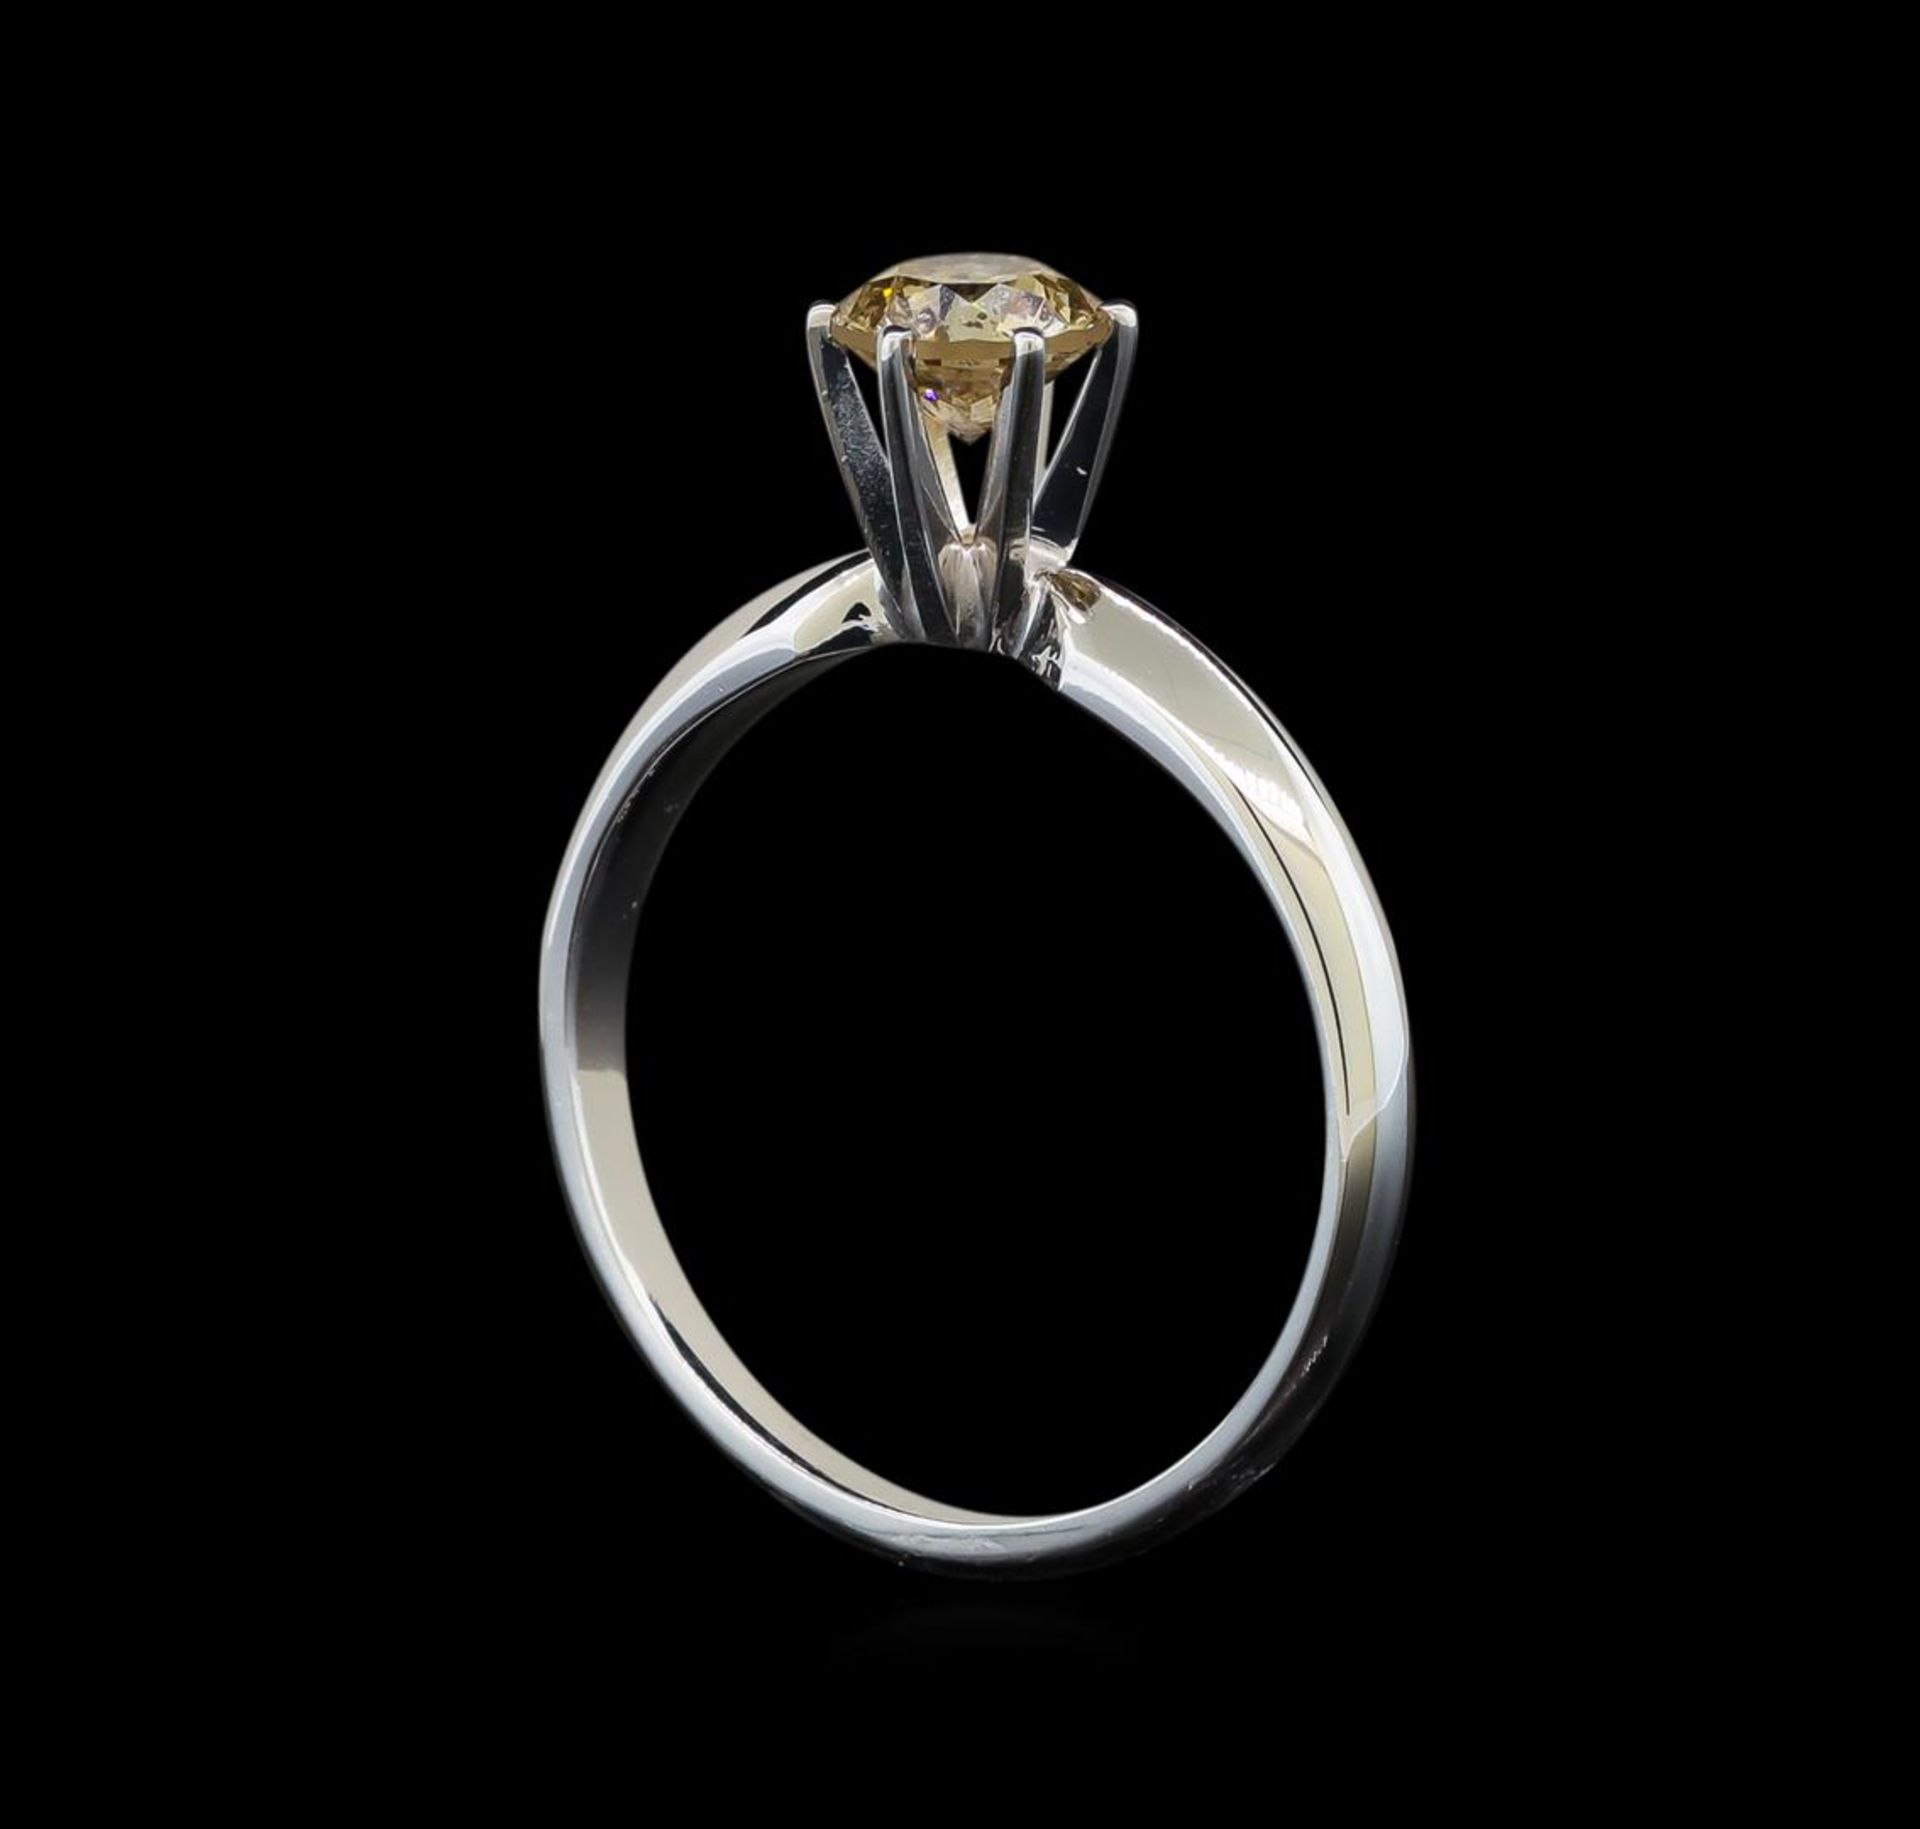 14KT White Gold 0.70 ctw Round Cut Fancy Brown Diamond Solitaire Ring - Image 4 of 5